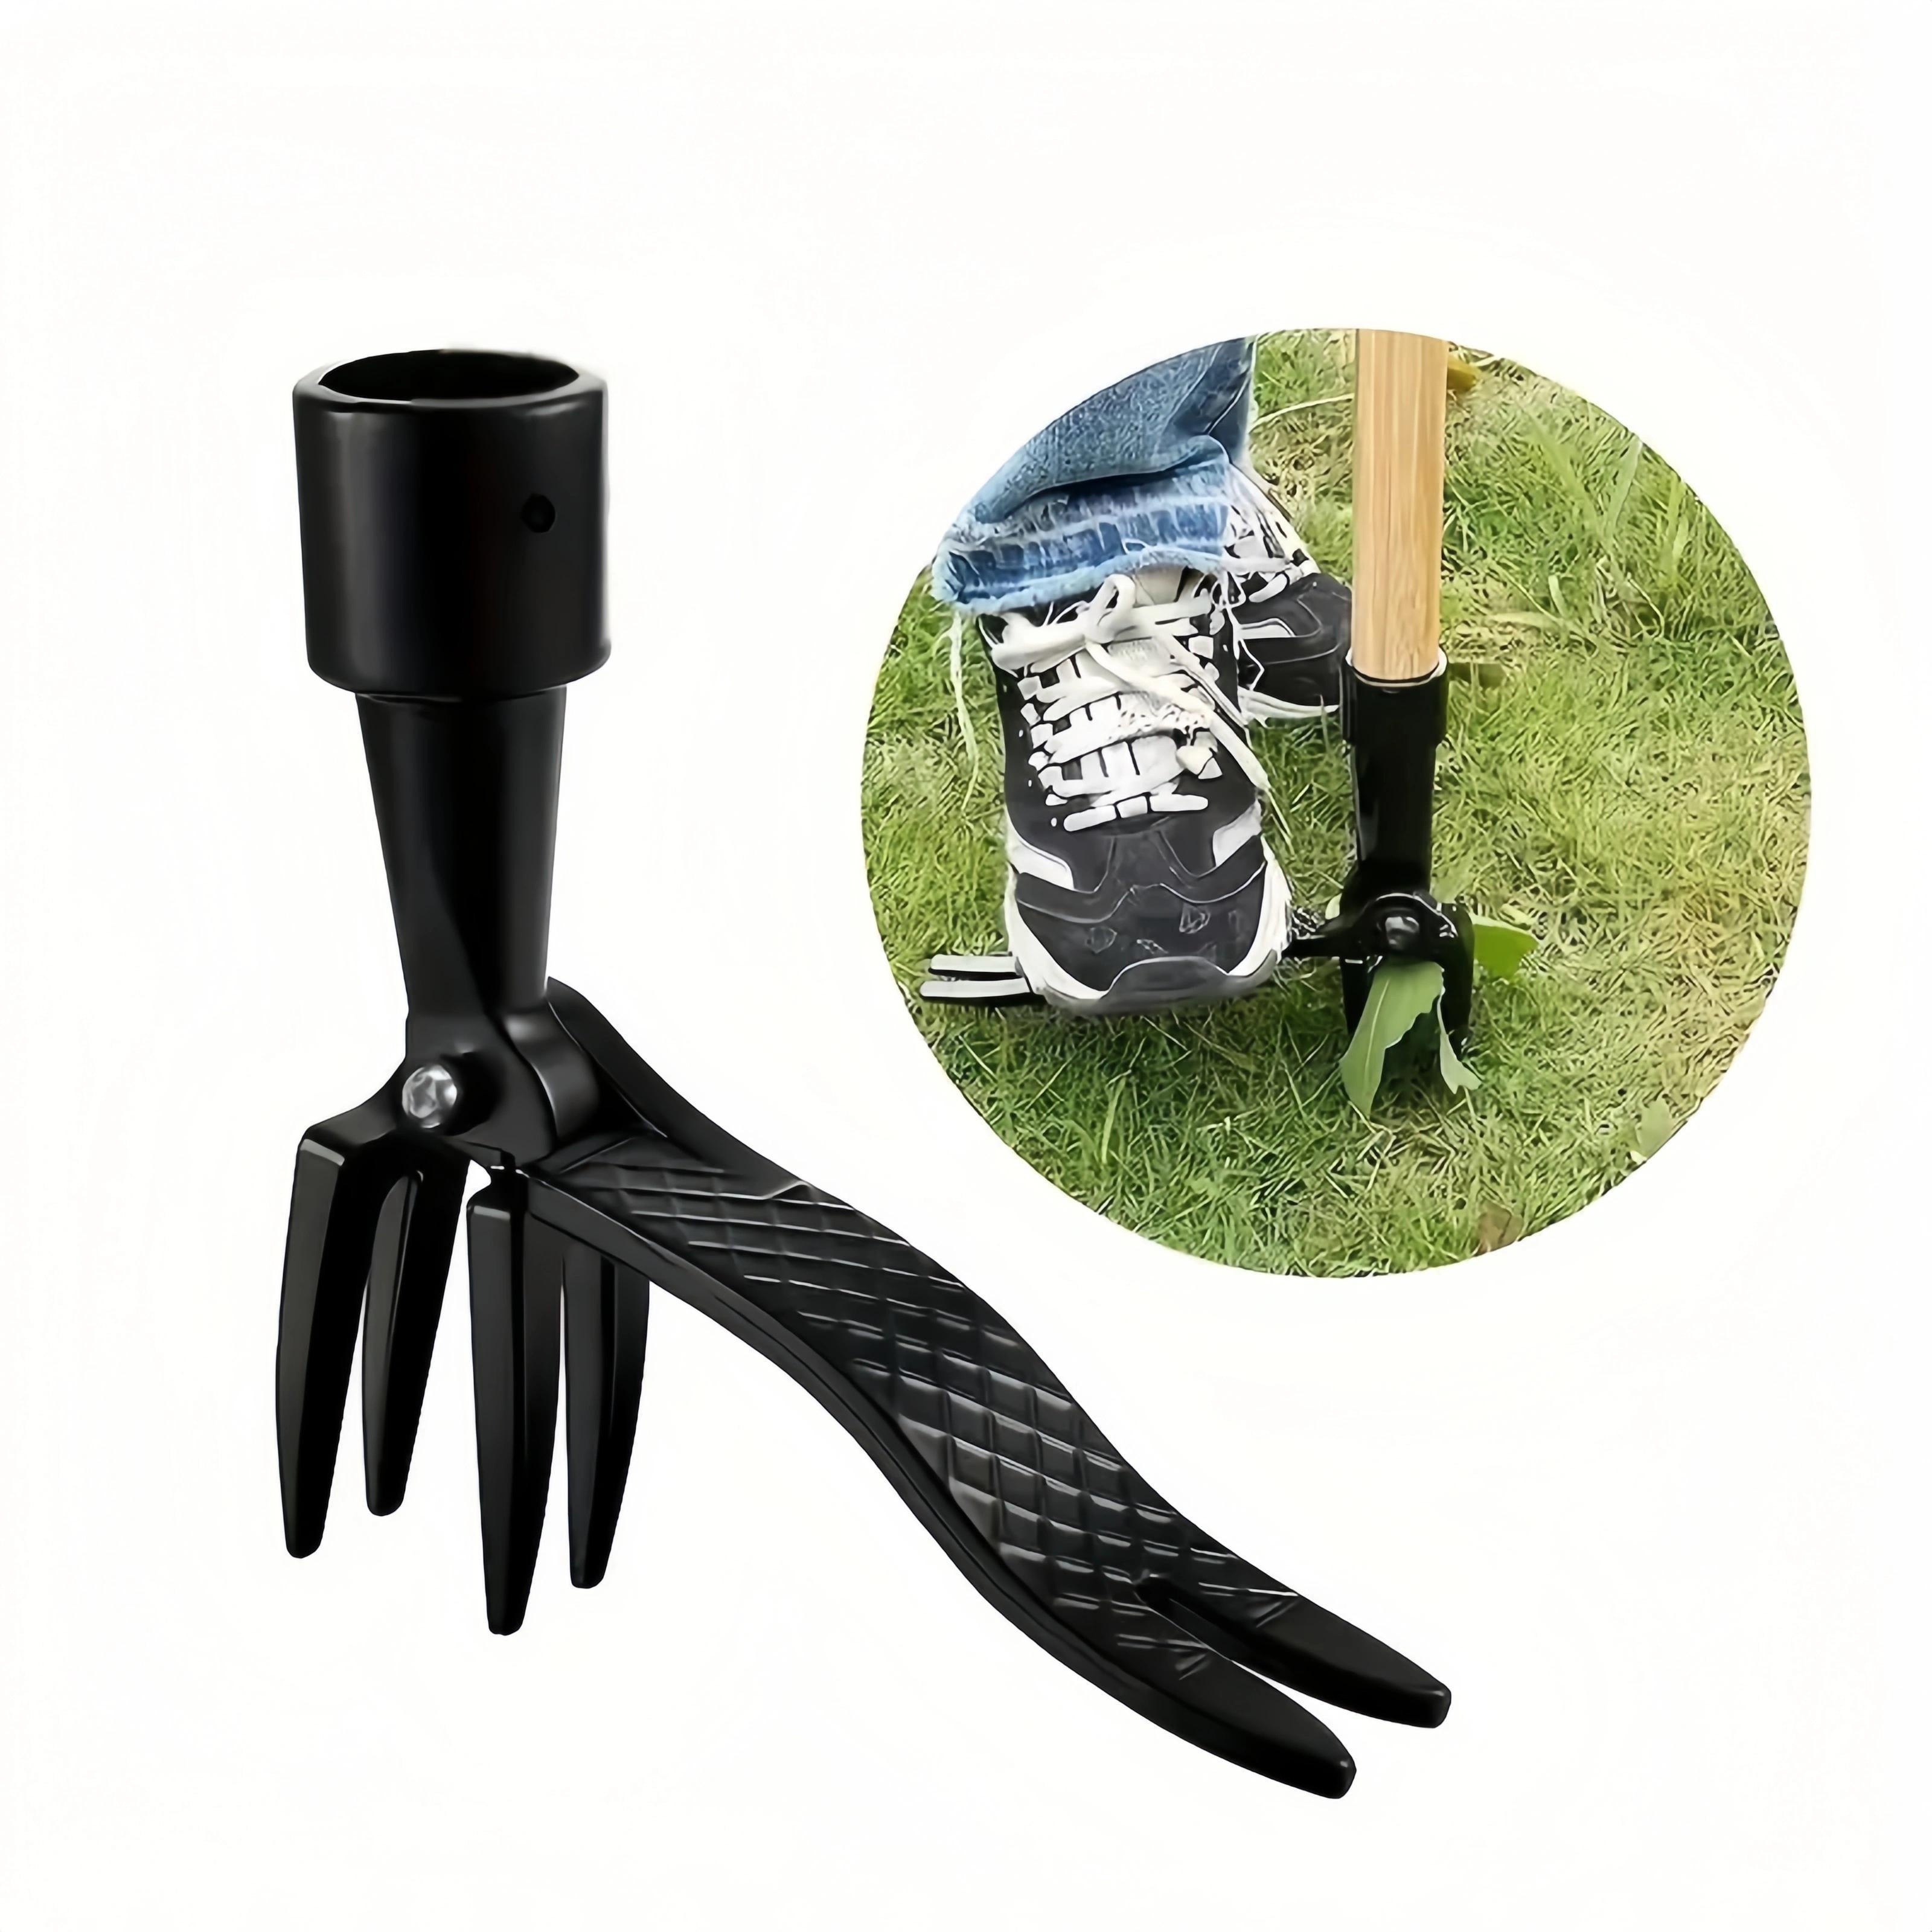 

1pc, Stand-up Weeder Tool, 37.8 Inch Metal Long Handle Puller, No-bend Easy Root Removal, Garden Lawn Weeding Equipment